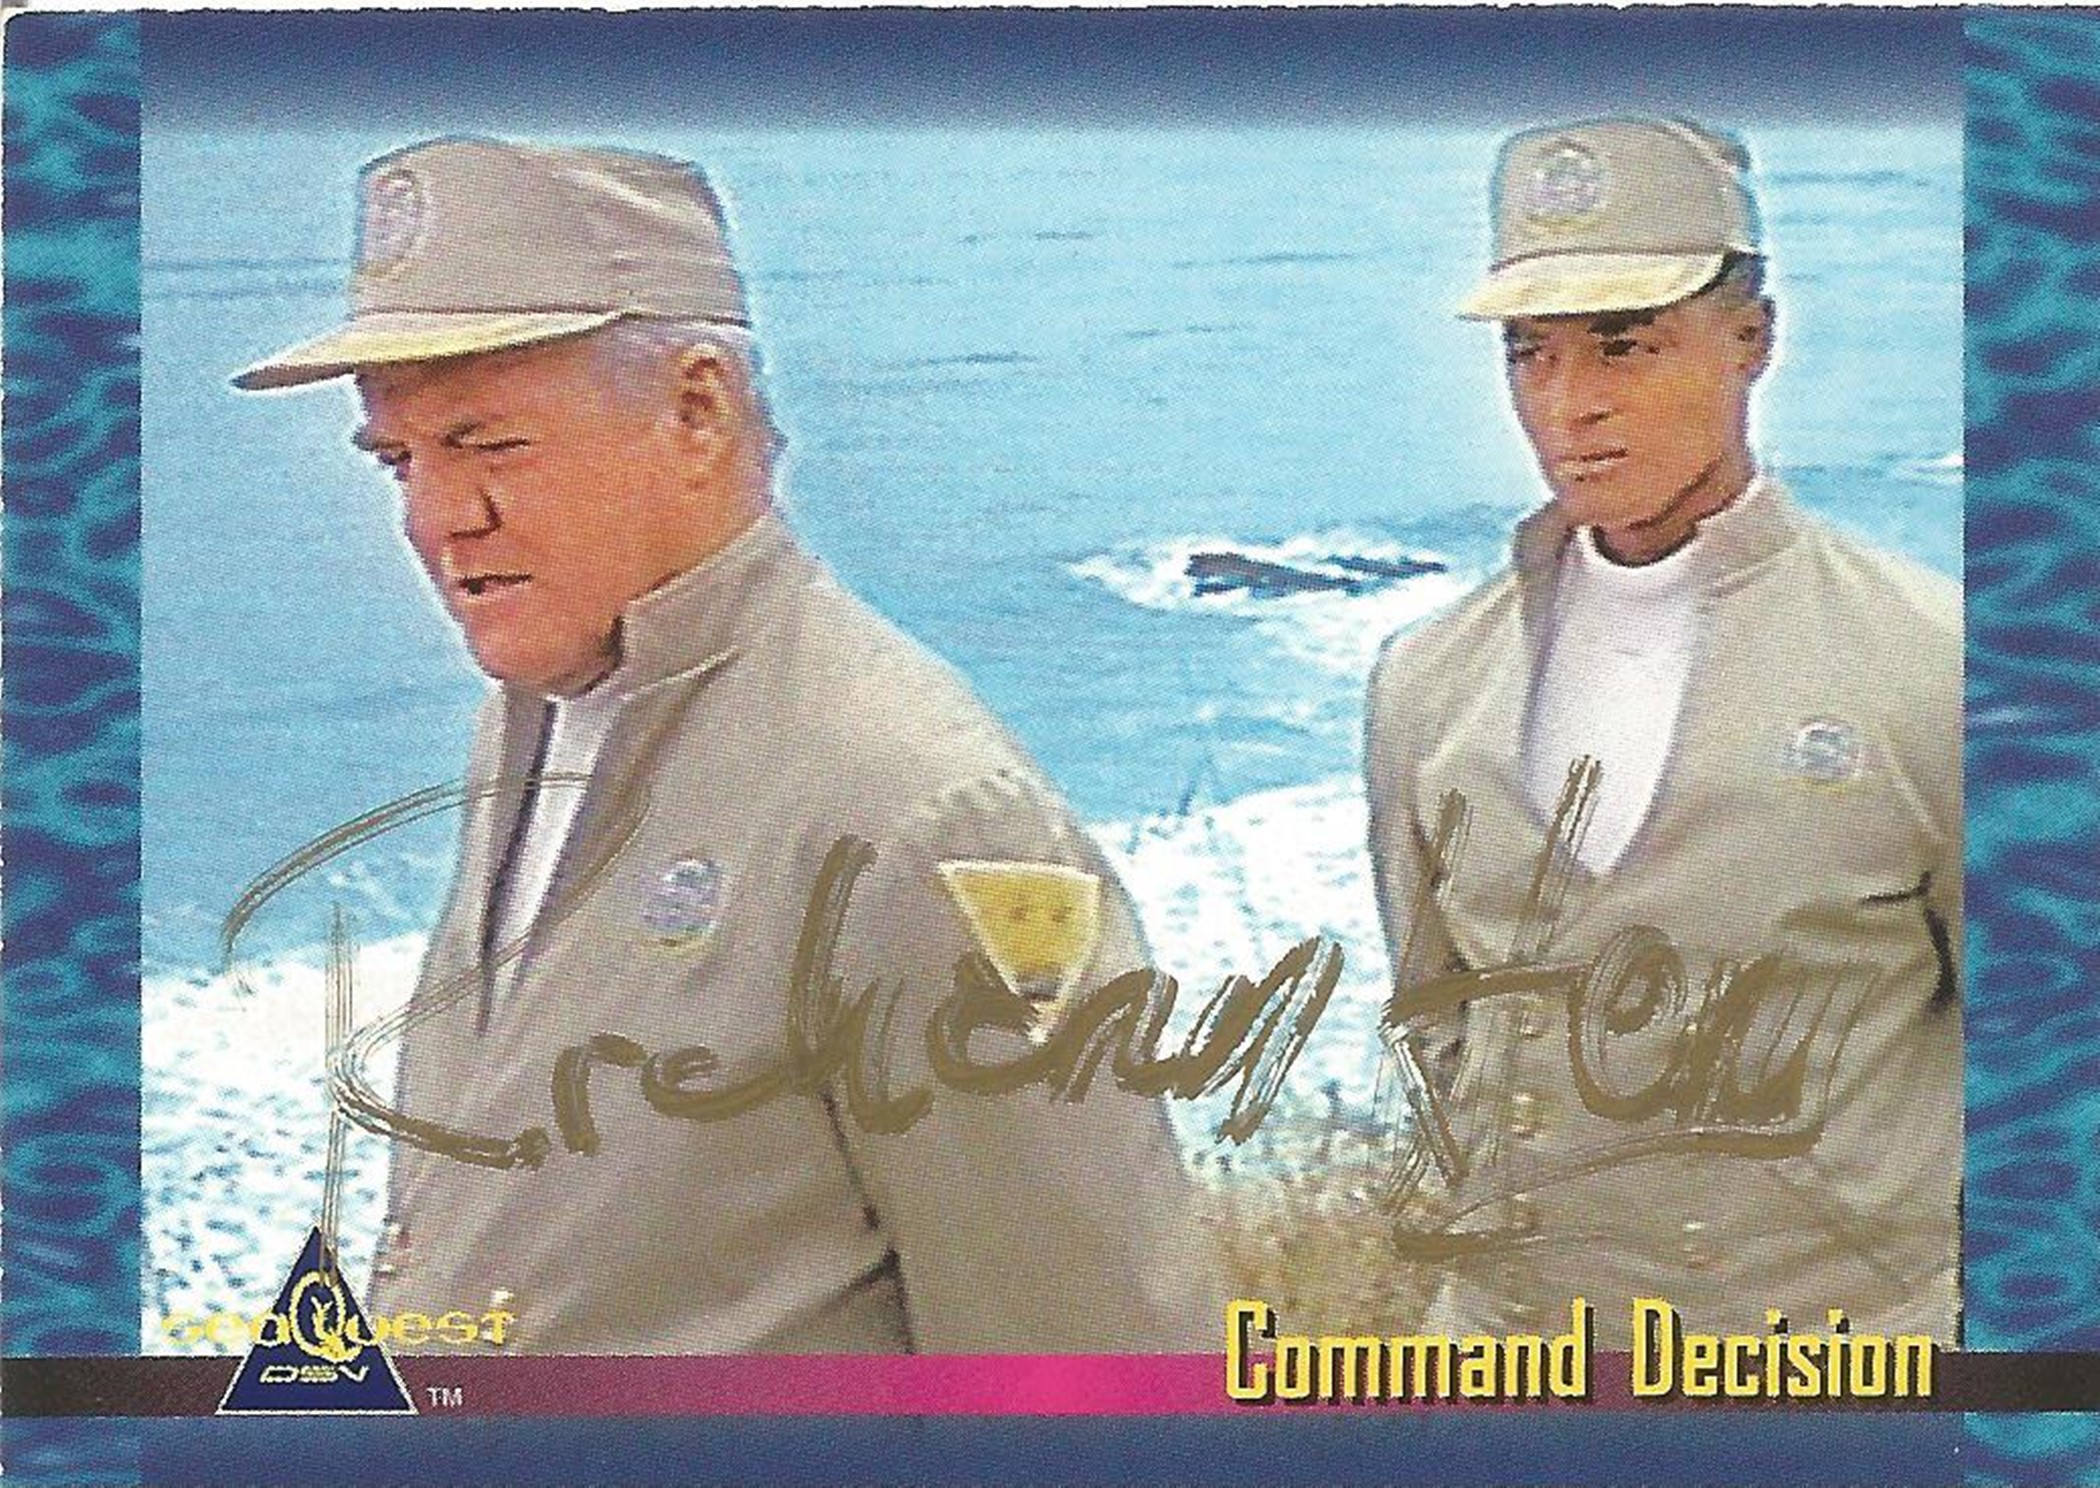 Richard Herd signed trading card for Sea Quest Herd was known for playing Admiral Noyce during